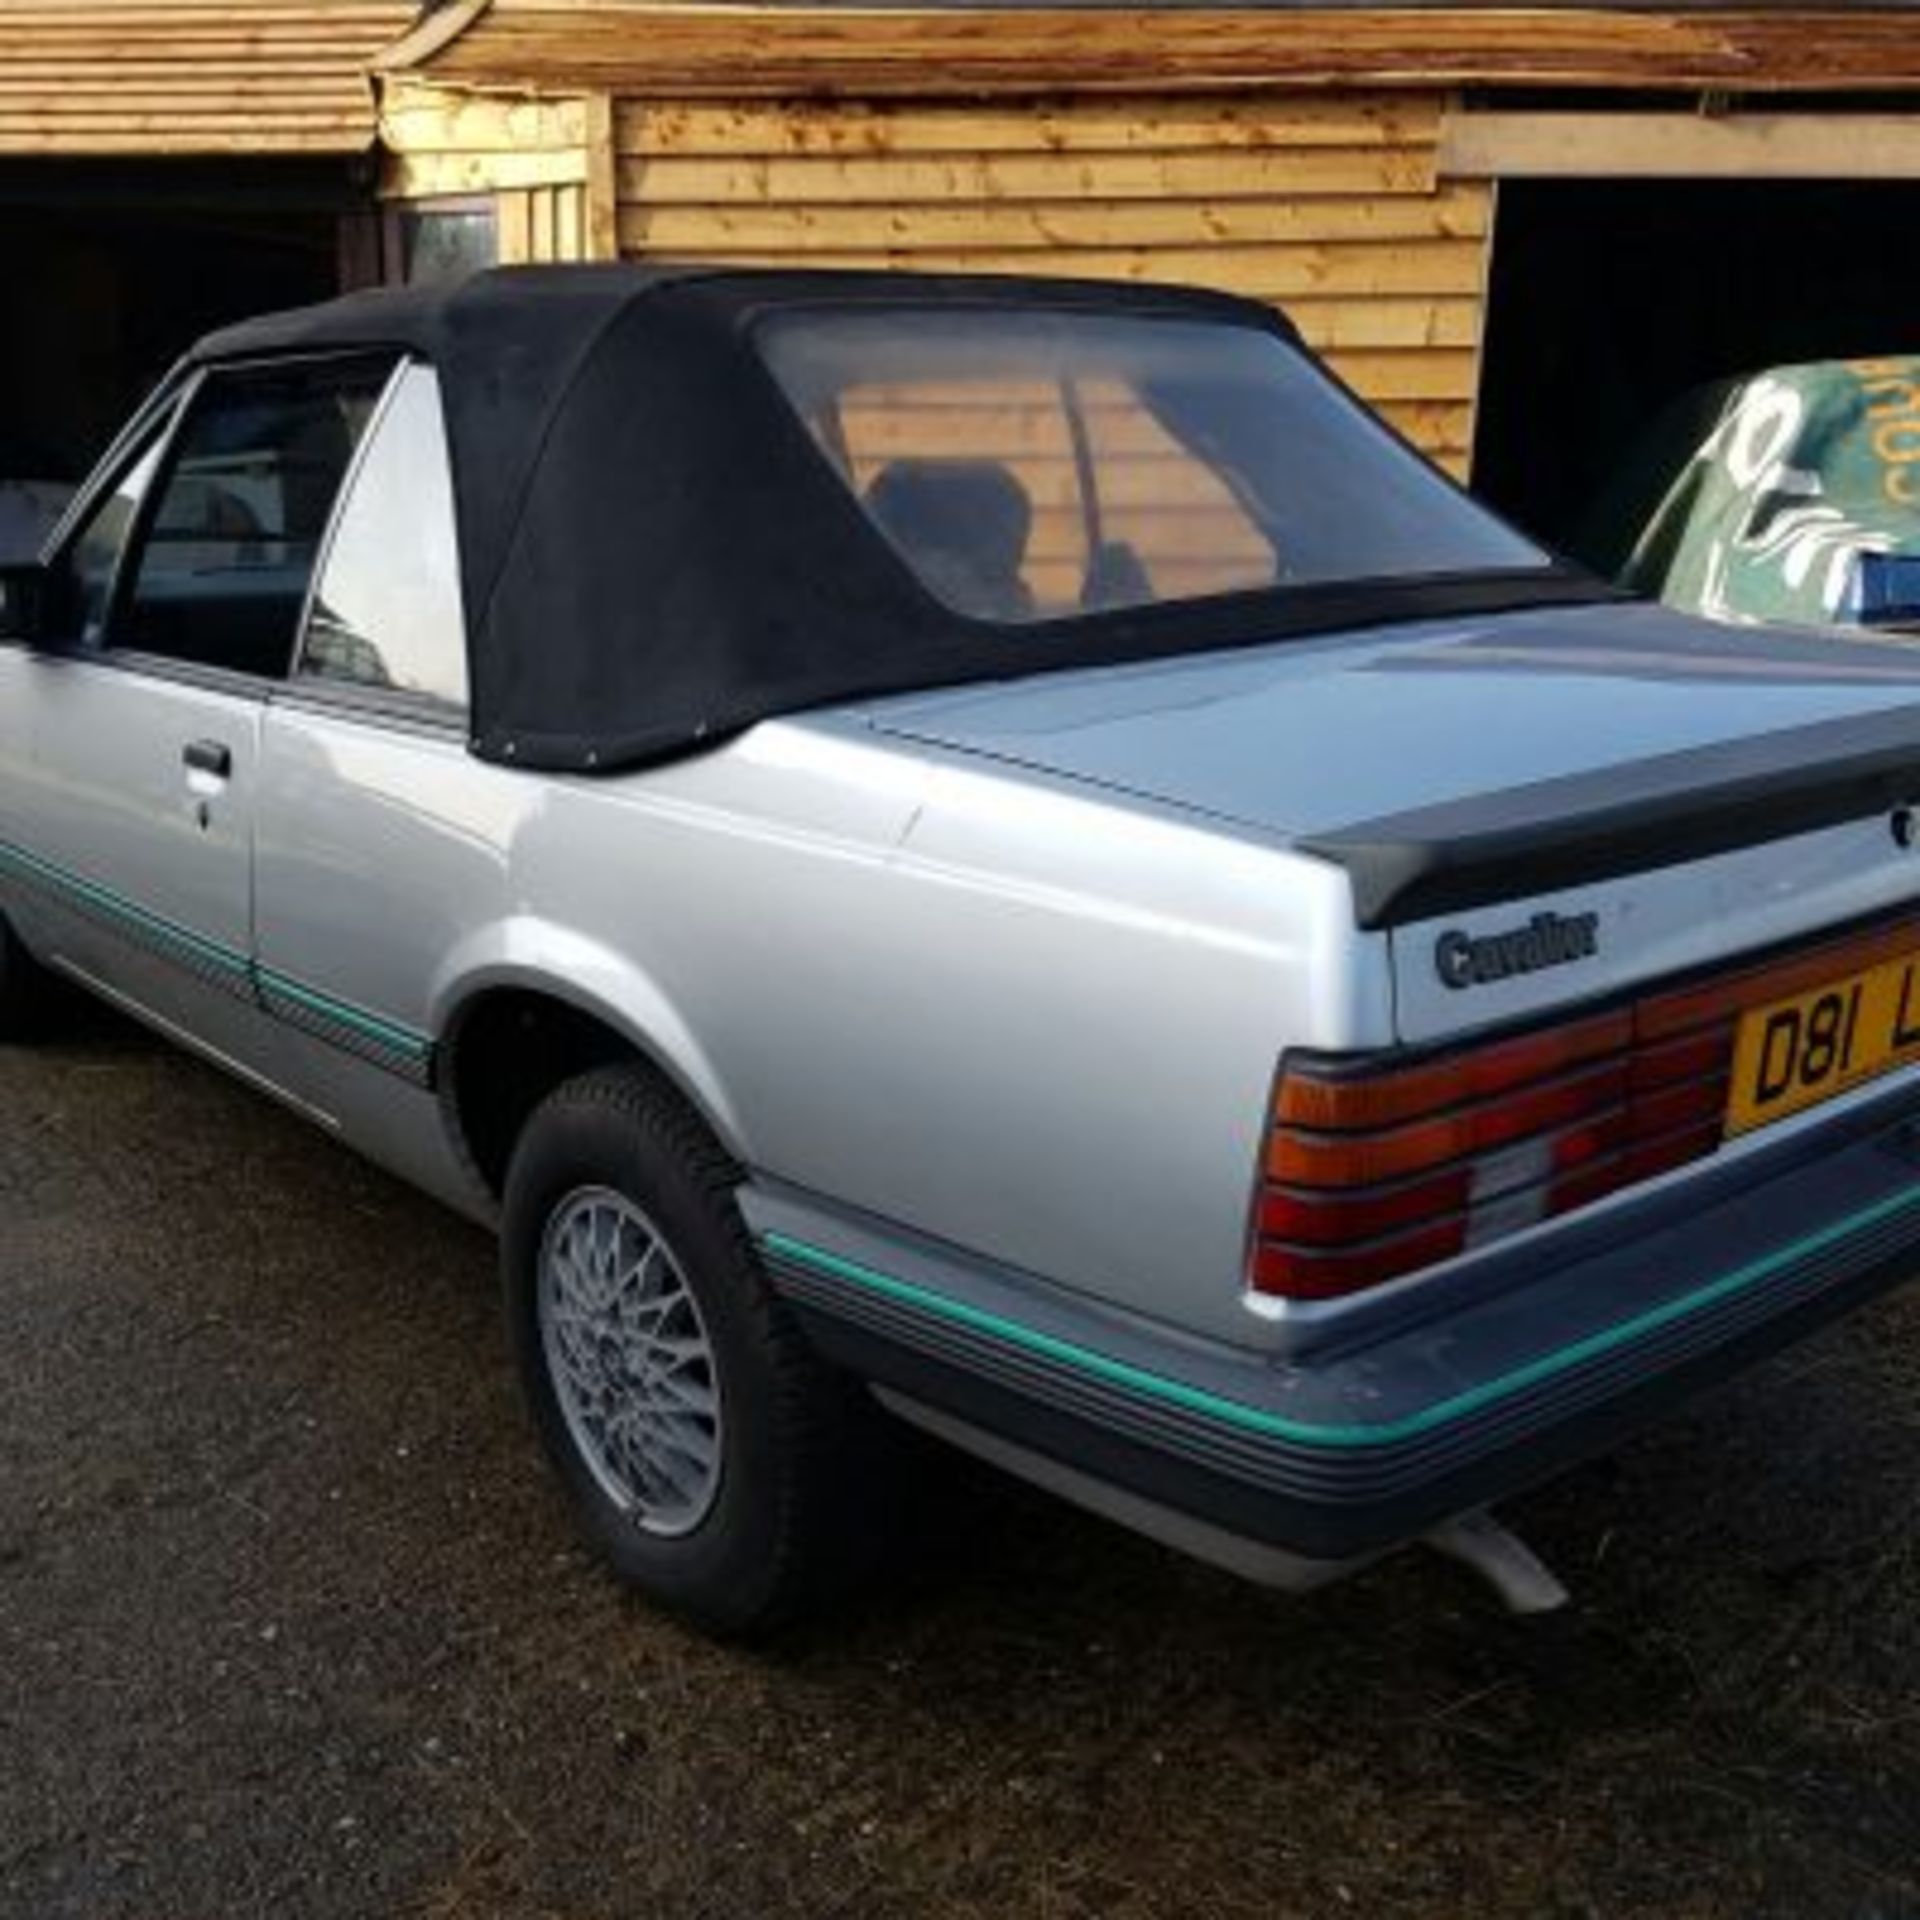 Vauxhall Cavalier Convertible 1986 - We cannot remember the last time we saw one of these! A 1986 - Image 2 of 11